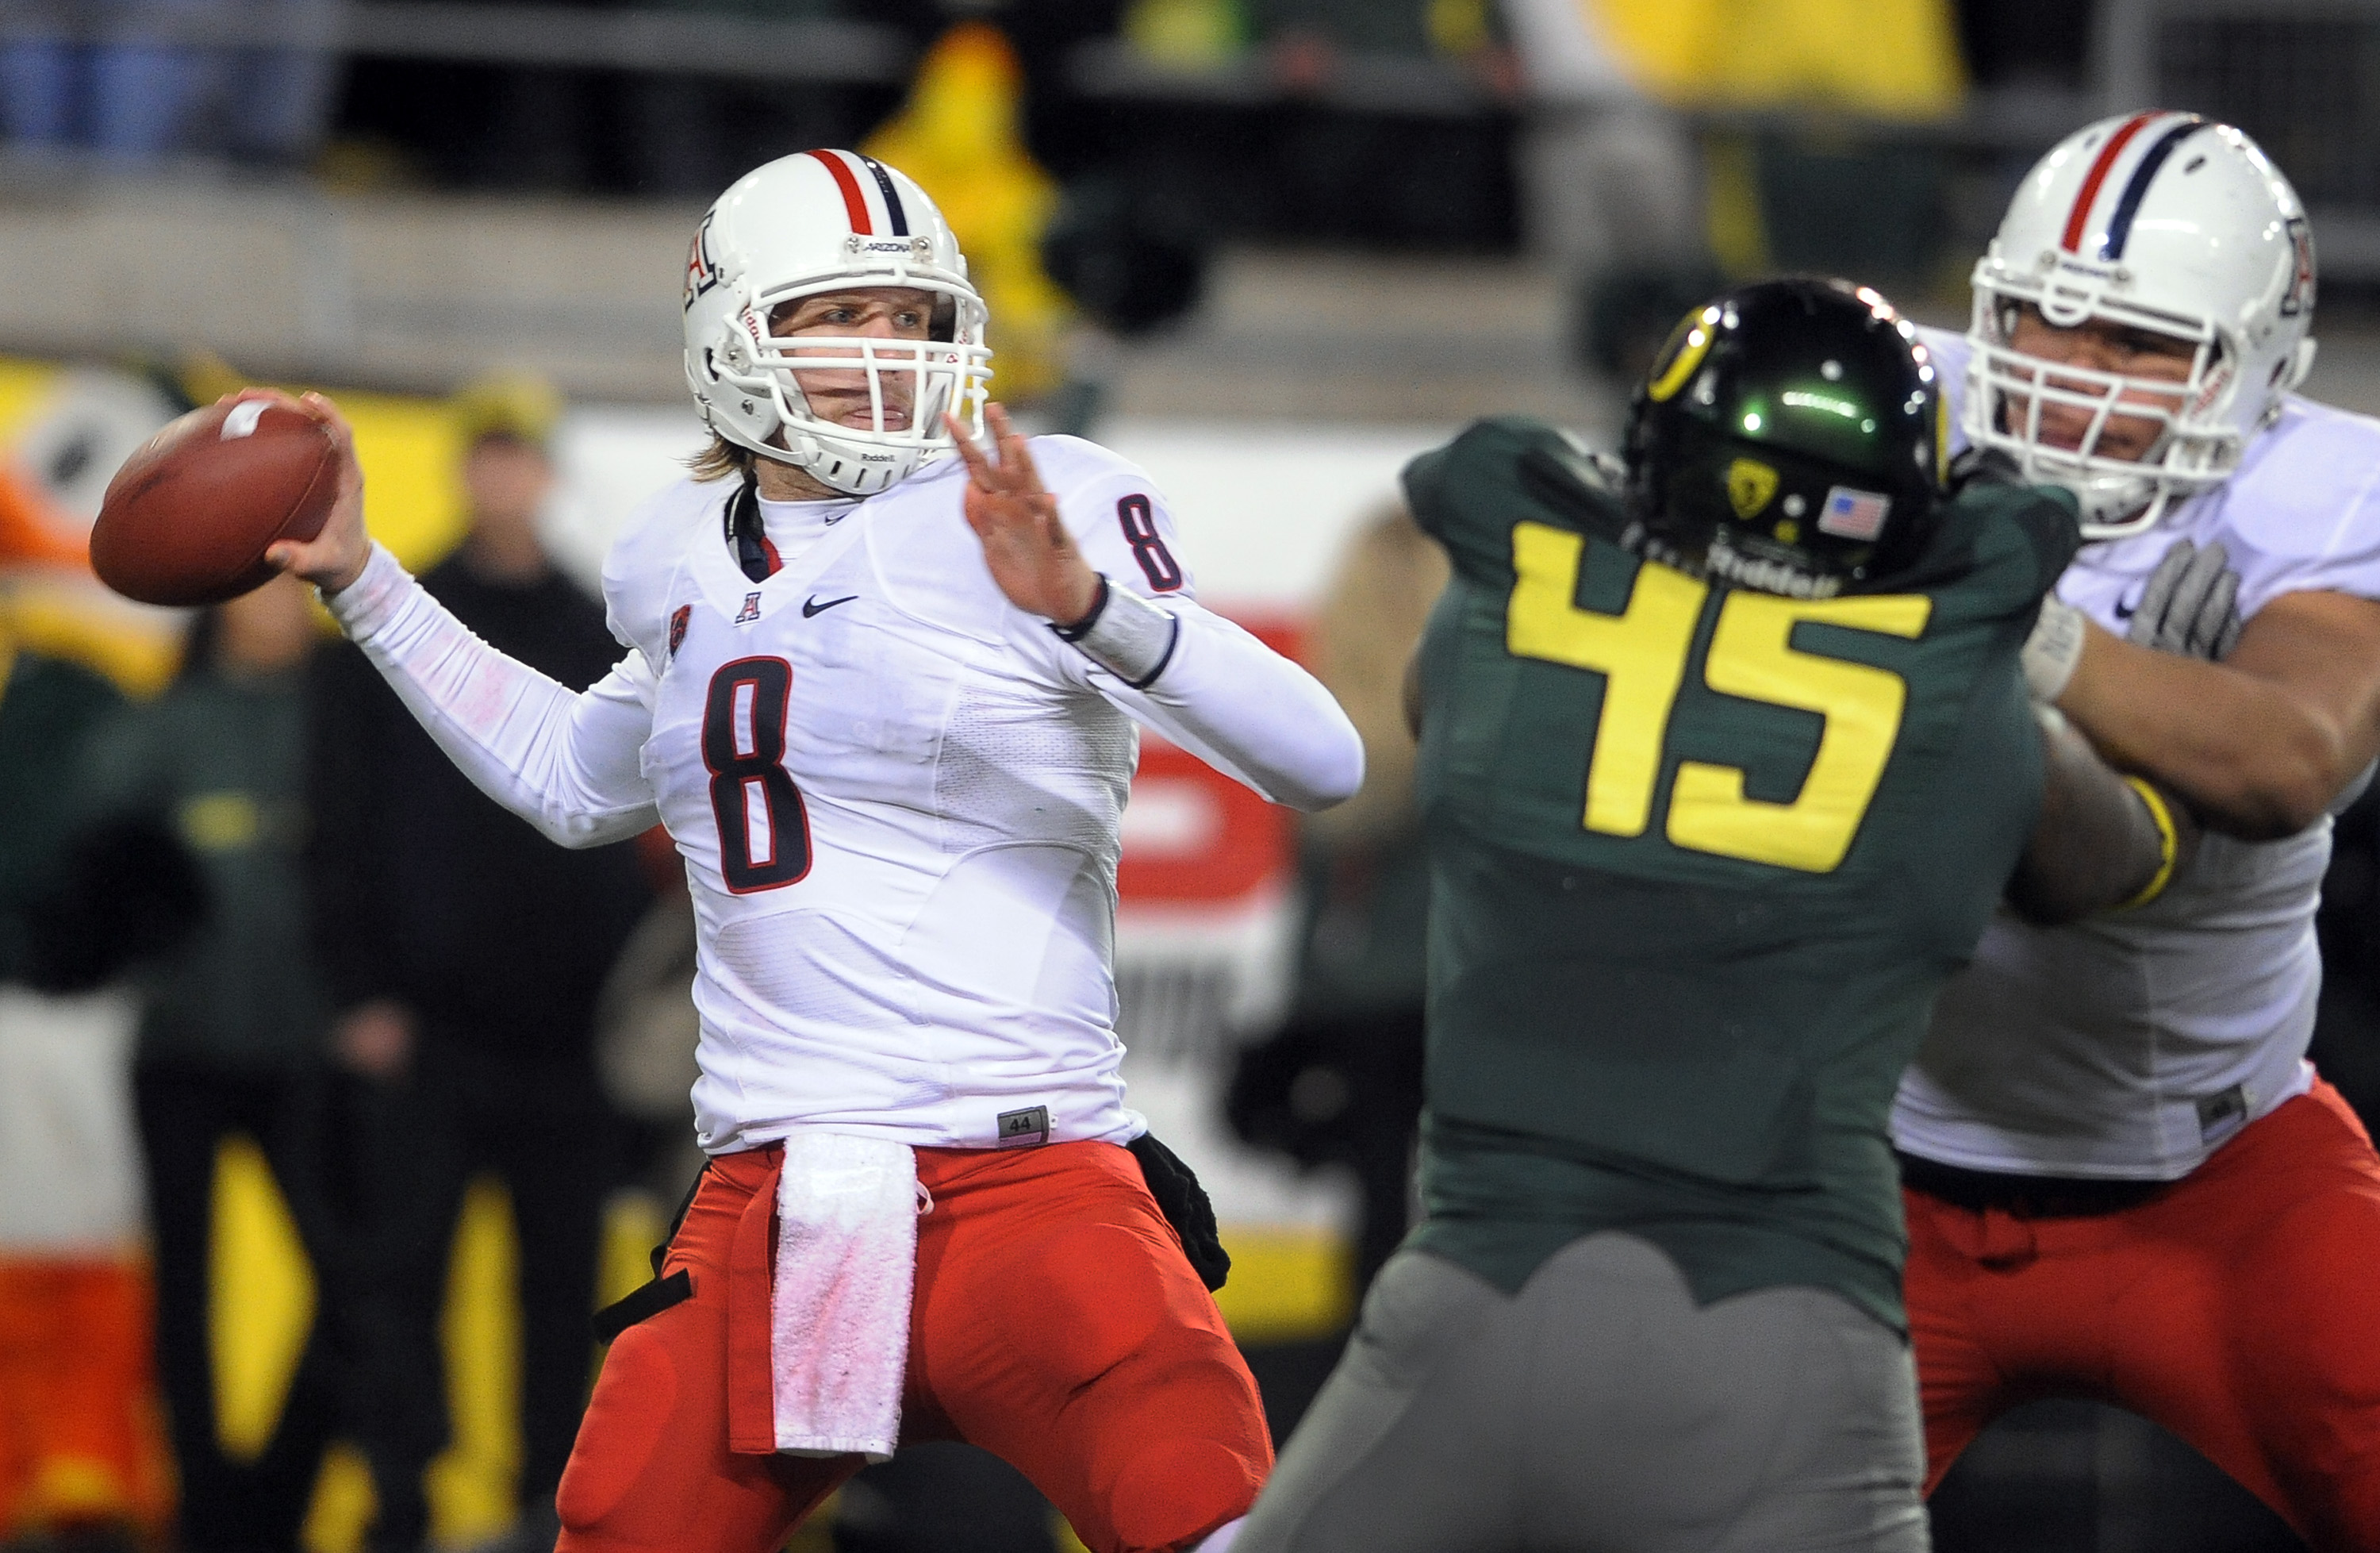 EUGENE, OR - NOVEMBER 26: Quarterback Nick Foles #8 of the Arizona Wildcats passes the ball as defensive end Terrell Turner #45 of the Oregon Ducks applies pressure in the fourth quarter of the game at Autzen Stadium on November 26, 2010 in Eugene, Oregon